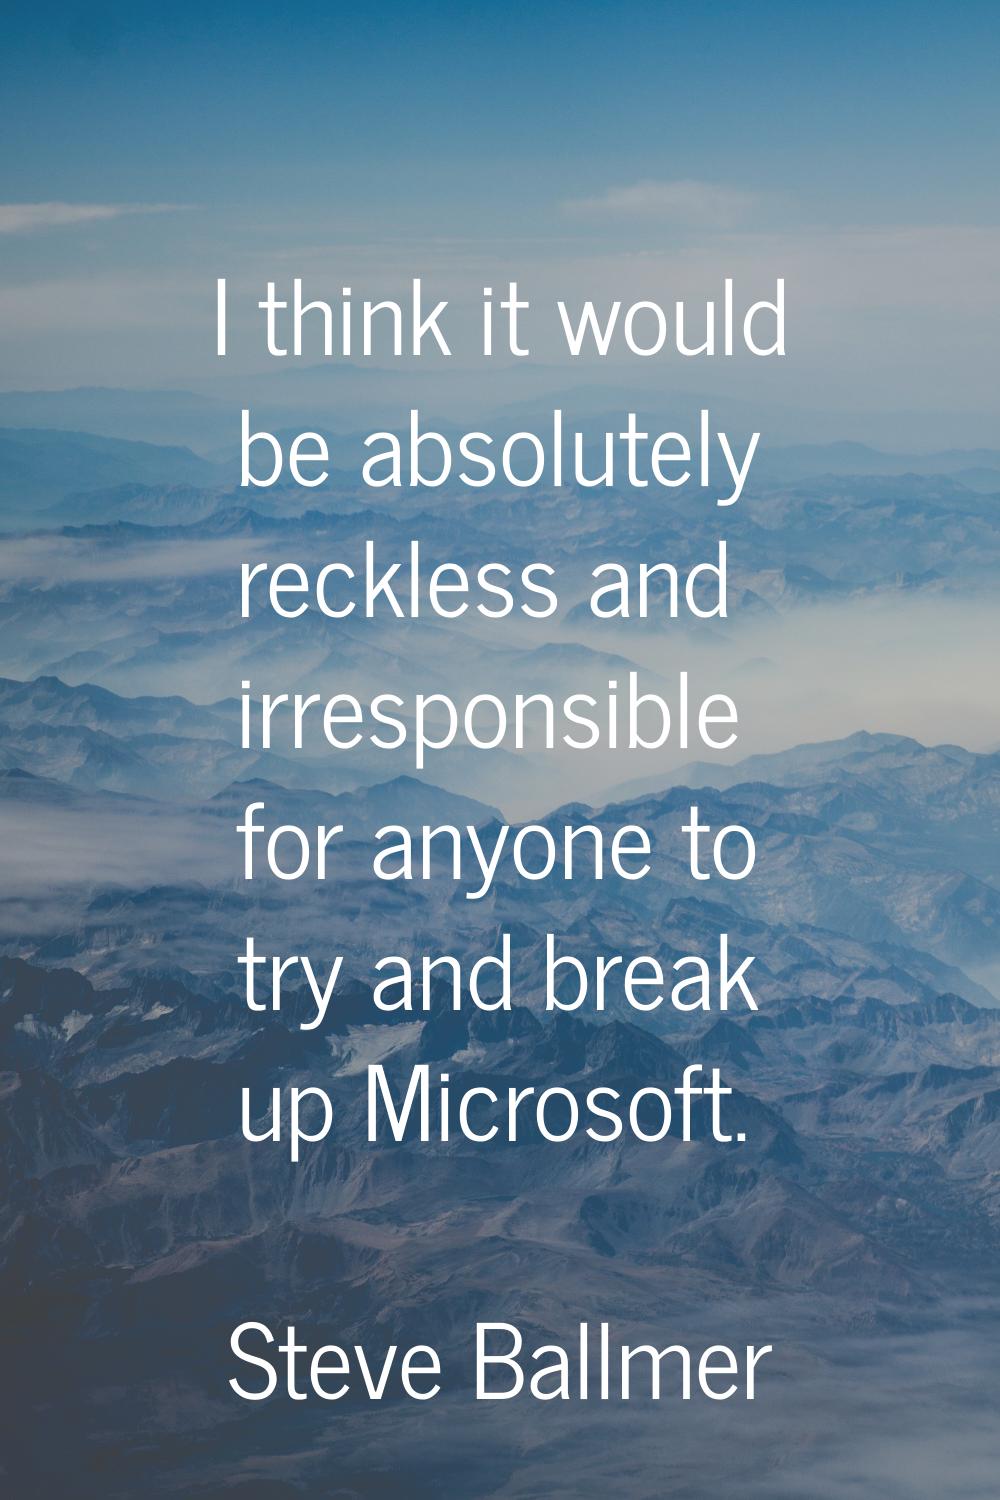 I think it would be absolutely reckless and irresponsible for anyone to try and break up Microsoft.